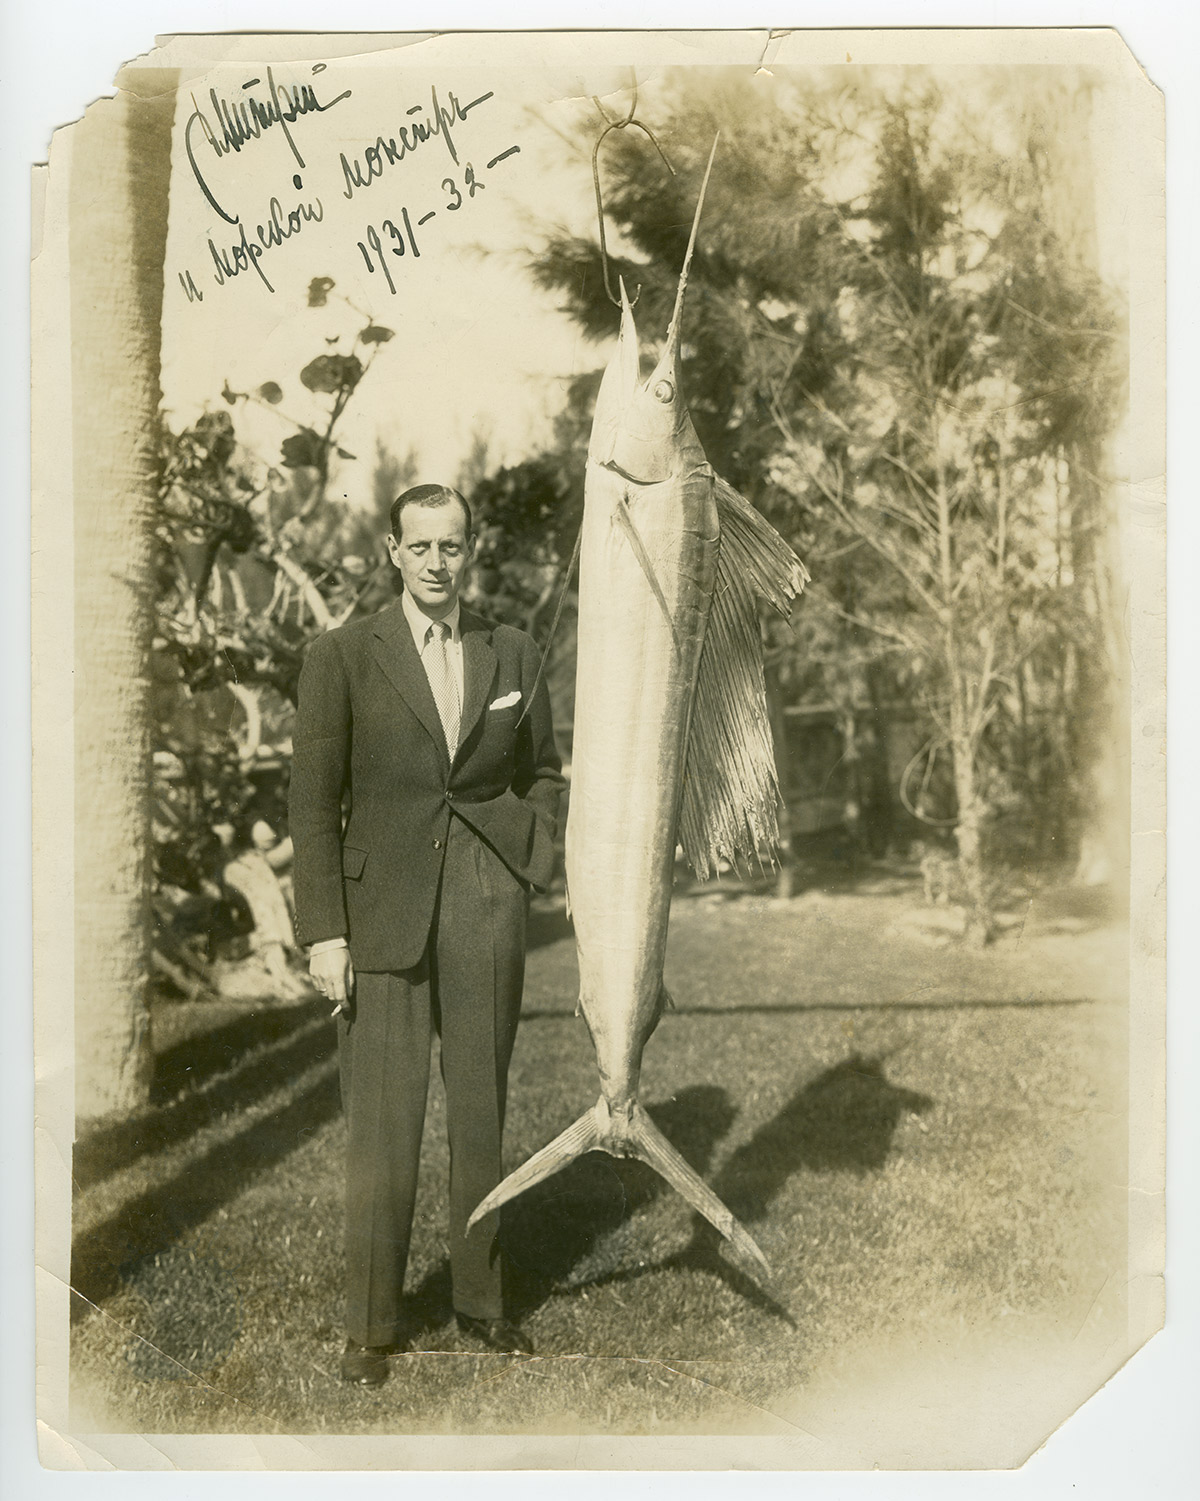 Dmitri Pavlovich with an 8-foot-long fish caught by himself. This photograph was published in several American newspapers / USA, 1931-1932.